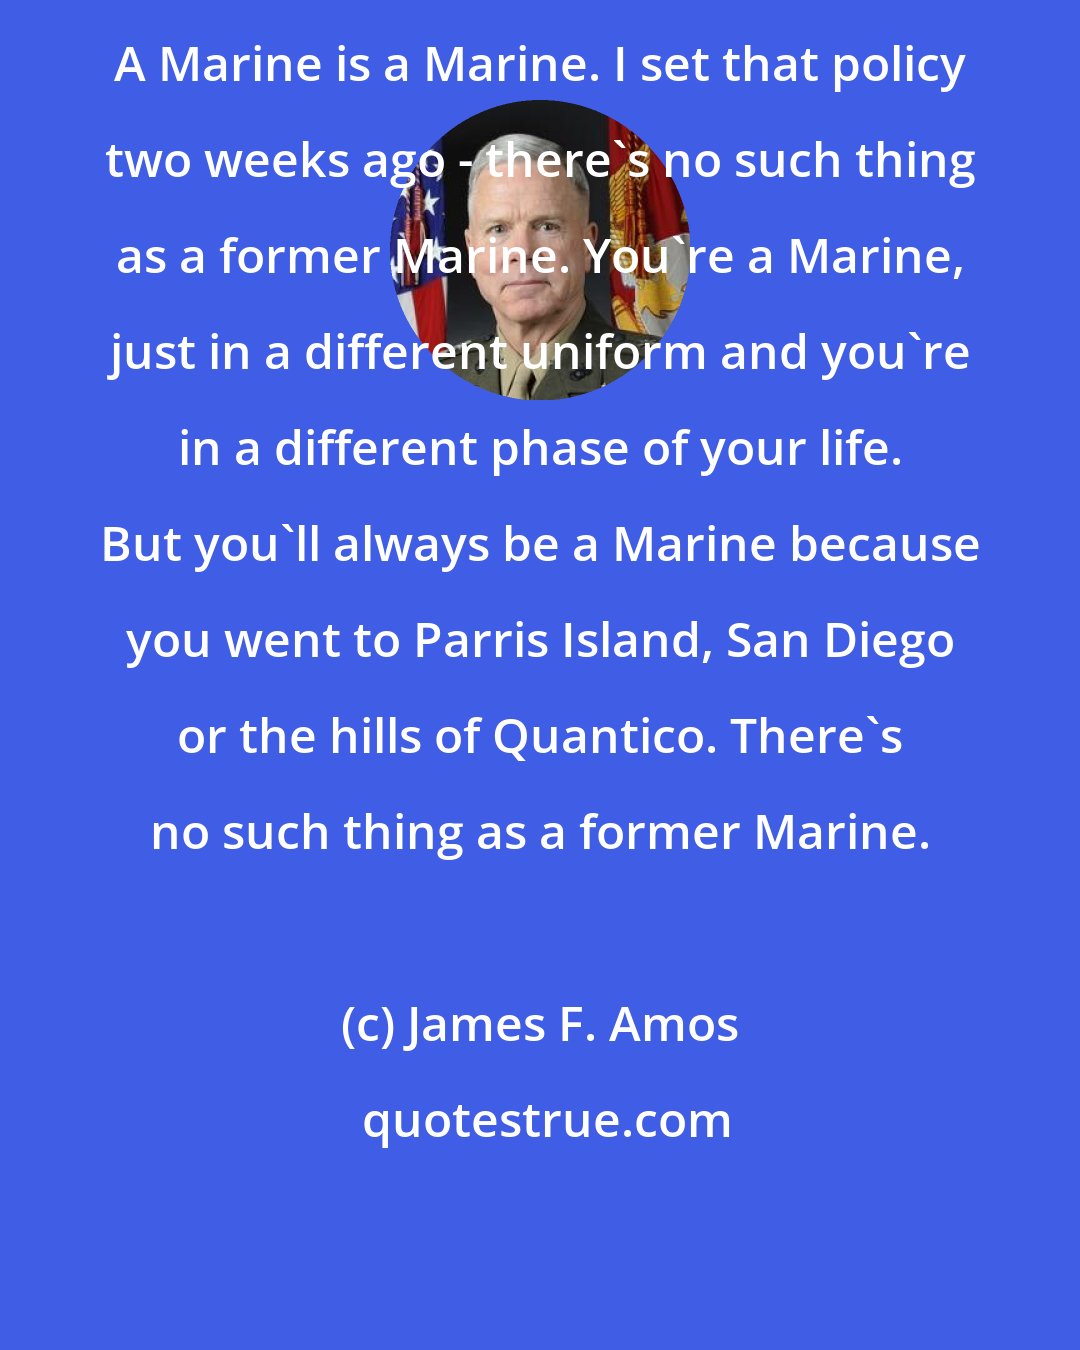 James F. Amos: A Marine is a Marine. I set that policy two weeks ago - there's no such thing as a former Marine. You're a Marine, just in a different uniform and you're in a different phase of your life. But you'll always be a Marine because you went to Parris Island, San Diego or the hills of Quantico. There's no such thing as a former Marine.